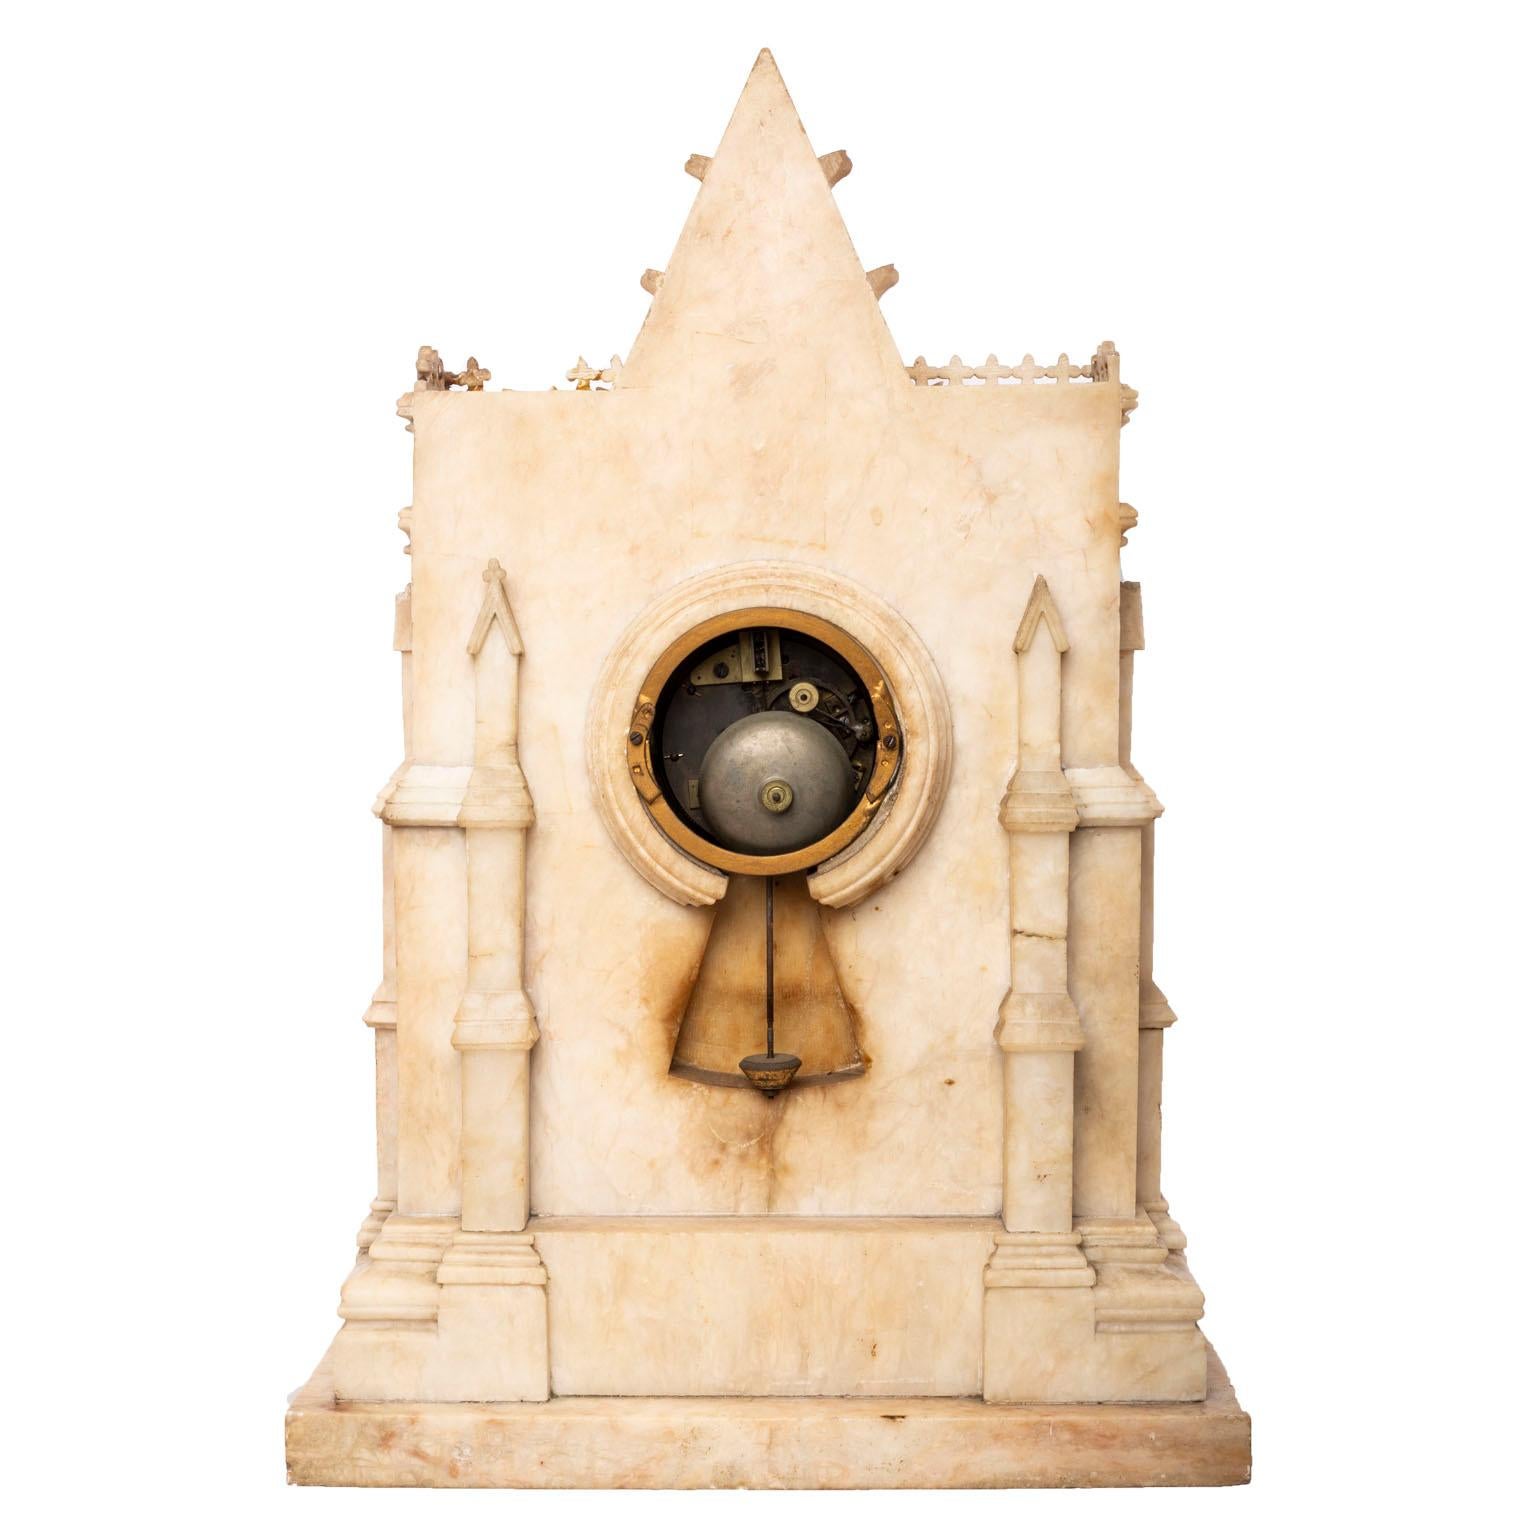 French Gothic style inlaid marble mantel clock.
Dial signed H. Azur à Paris. Height 21 inches, width 14 1/4 inches.